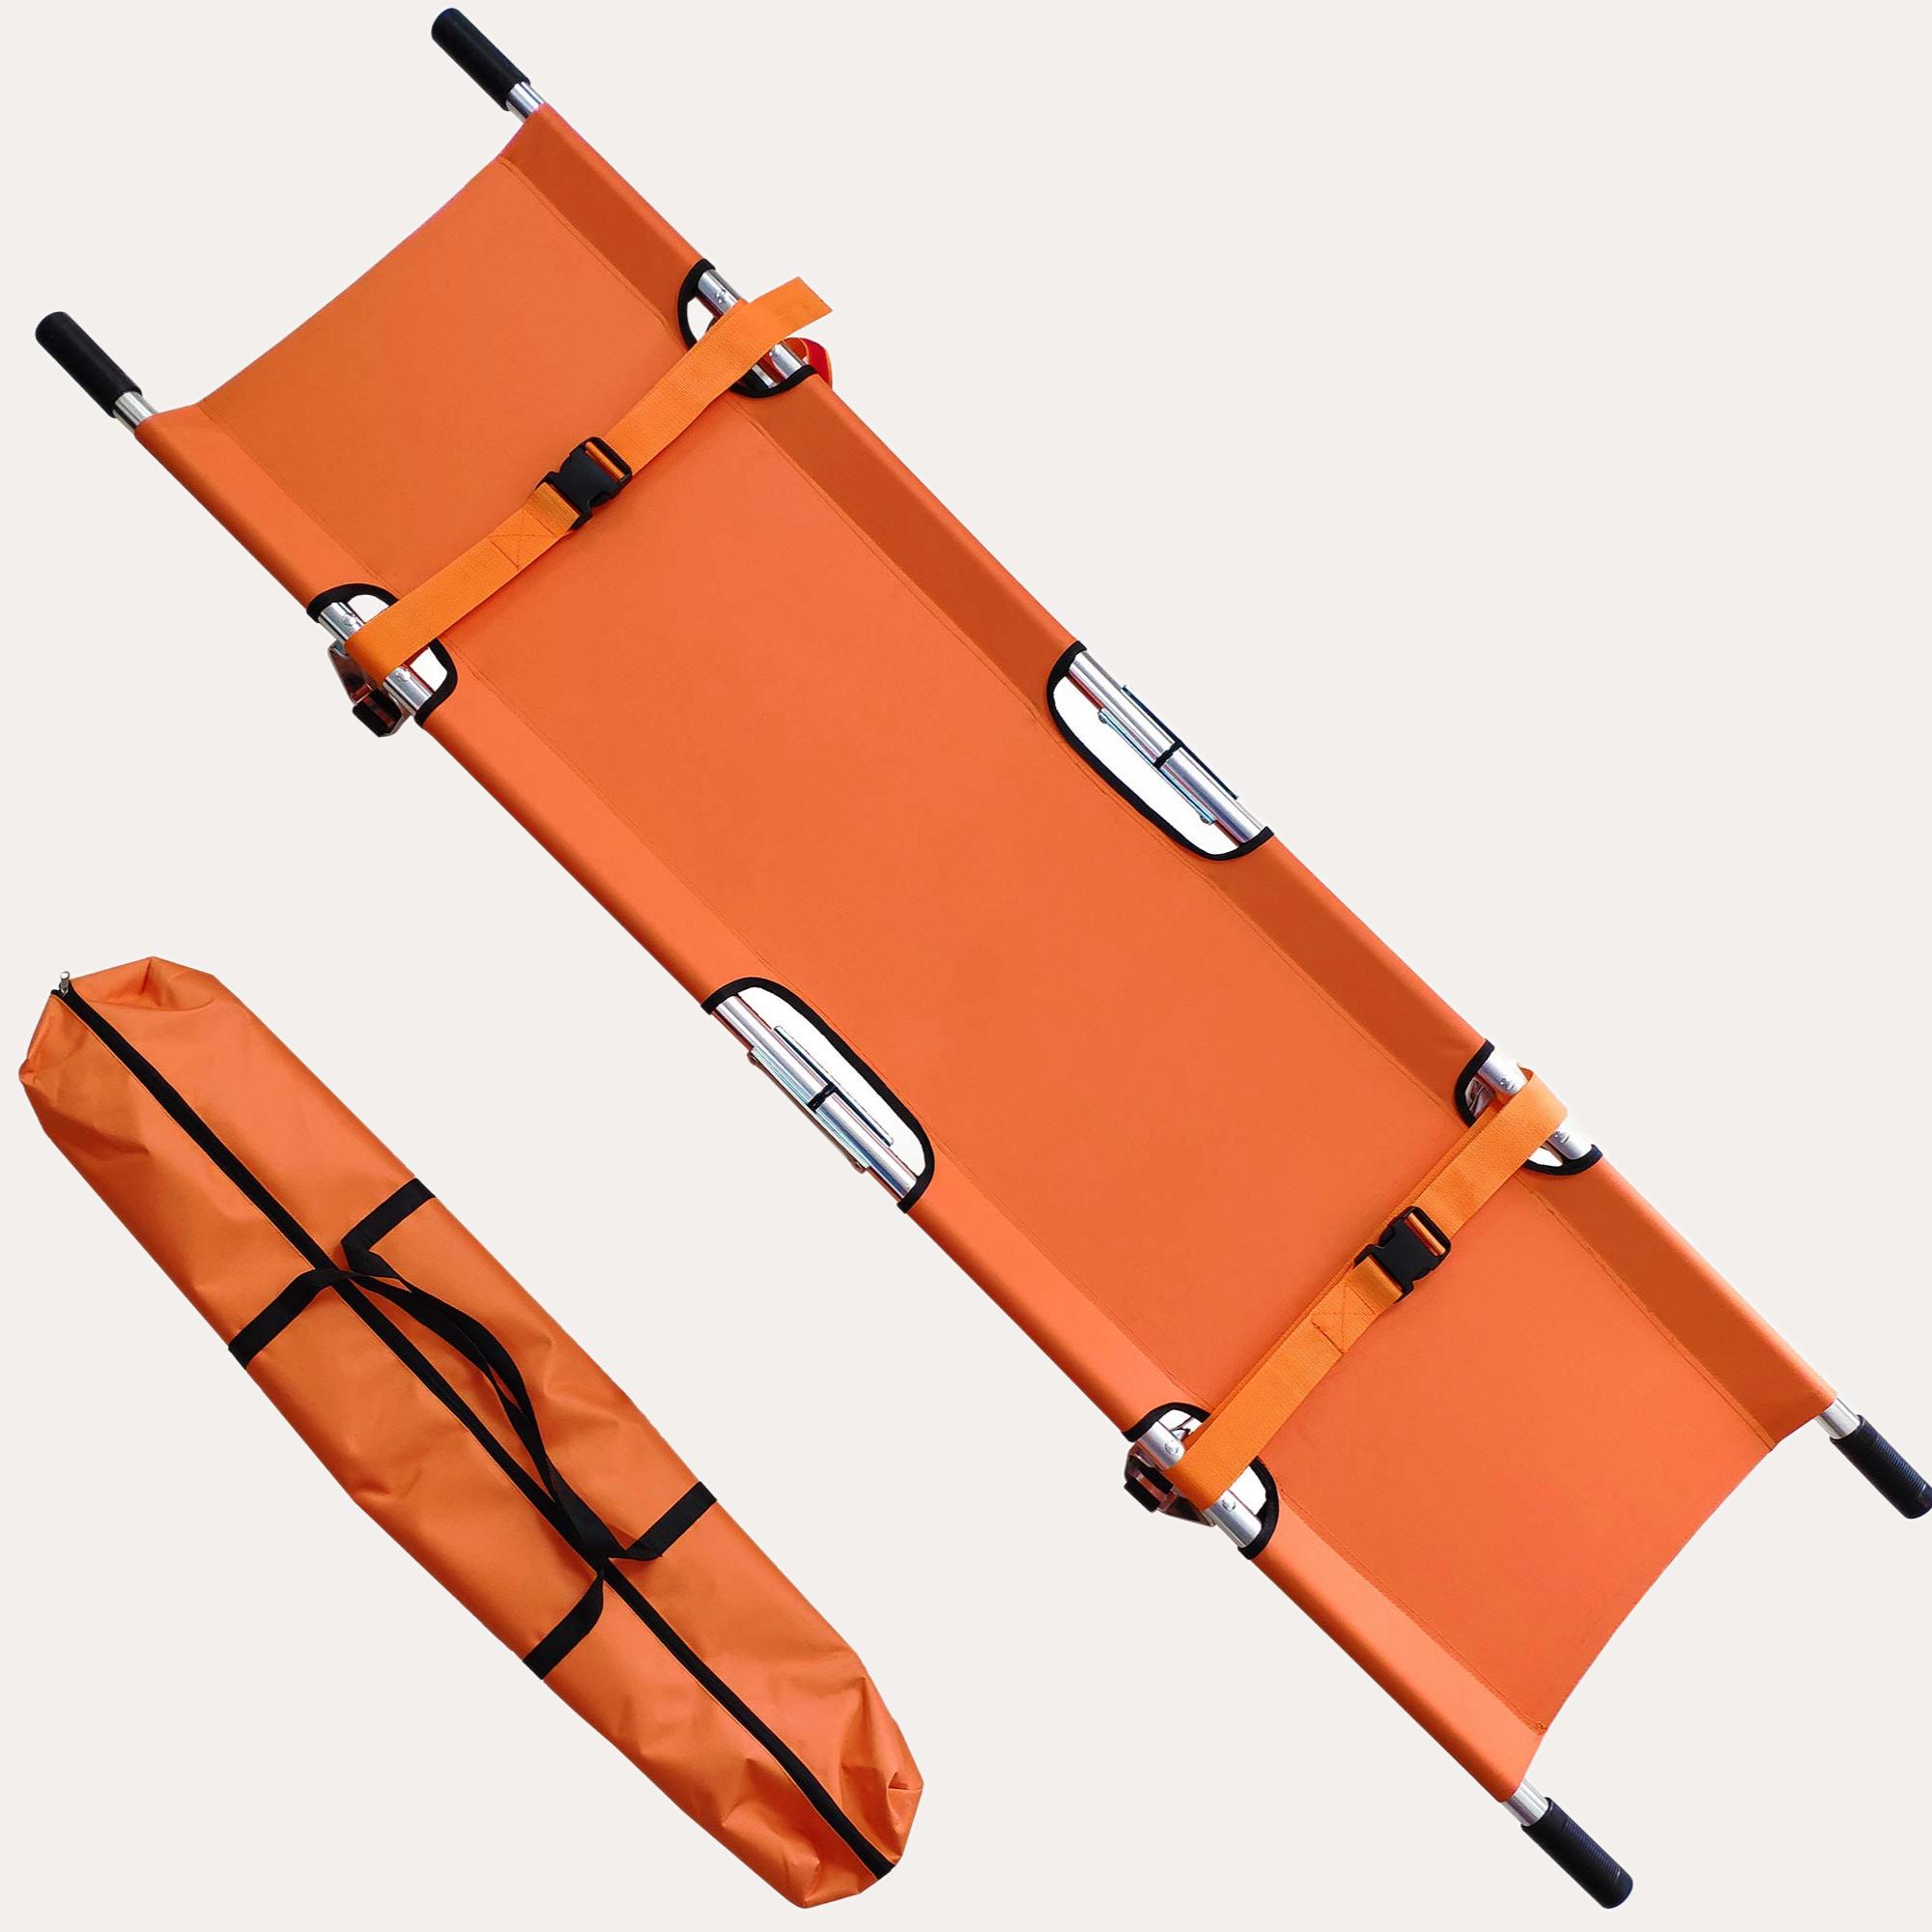 Safe Handling and Use of Portable Stretchers